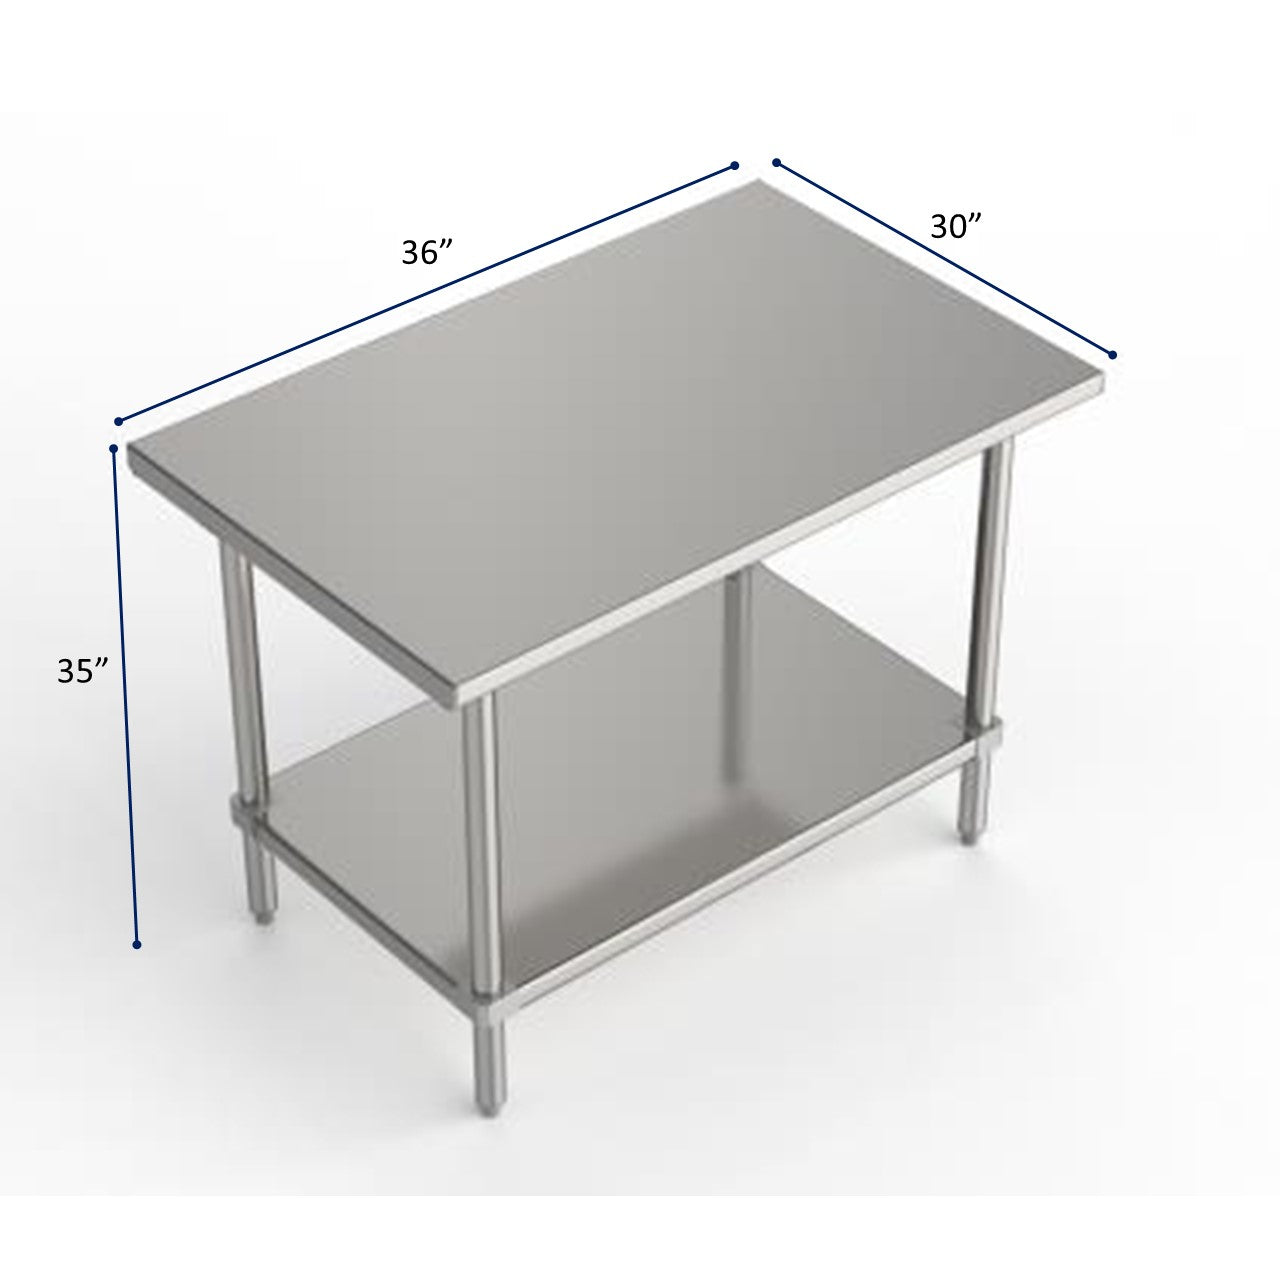 GSW Commercial Grade Flat Top Work Table with Stainless Steel Top, Galvanized Undershelf & Legs, Adjustable Bullet Feet, NSF/ETL Approved to Meet Sanitation Food Service Standard 37 (30"W x 36"L x 35"H)